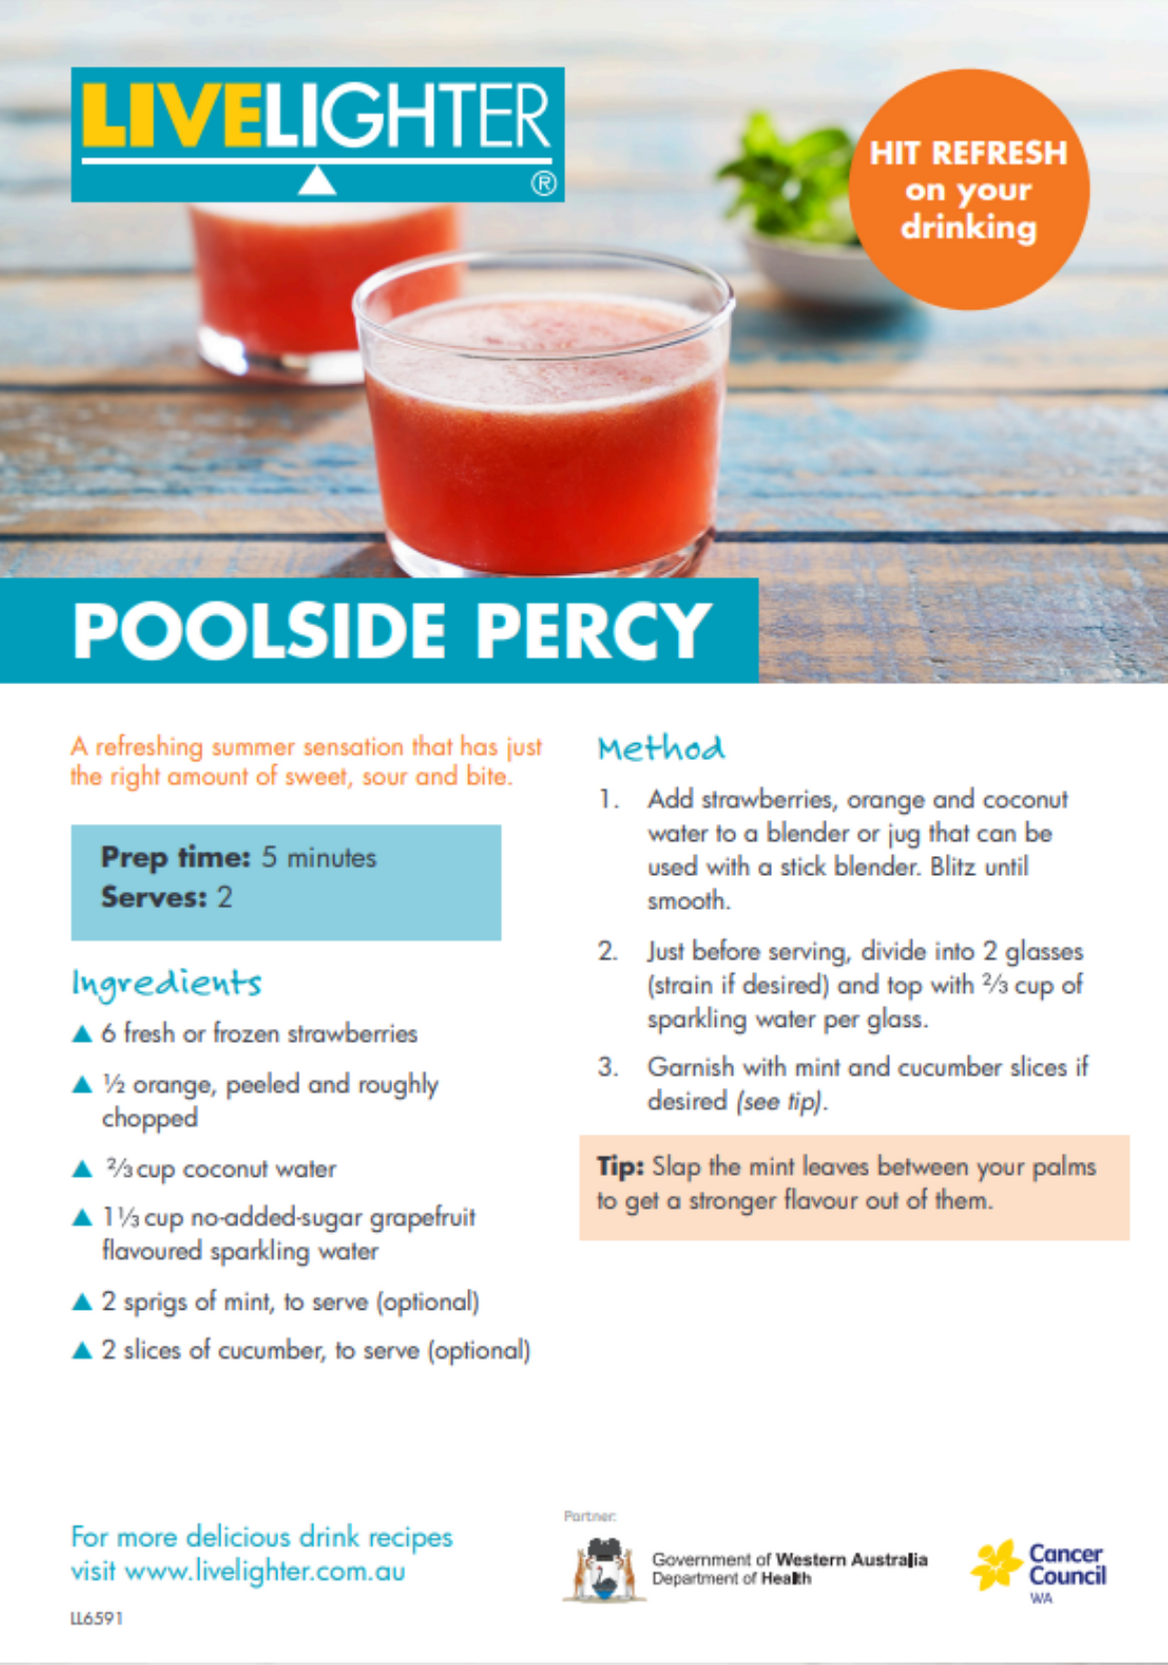 Poolside Percy